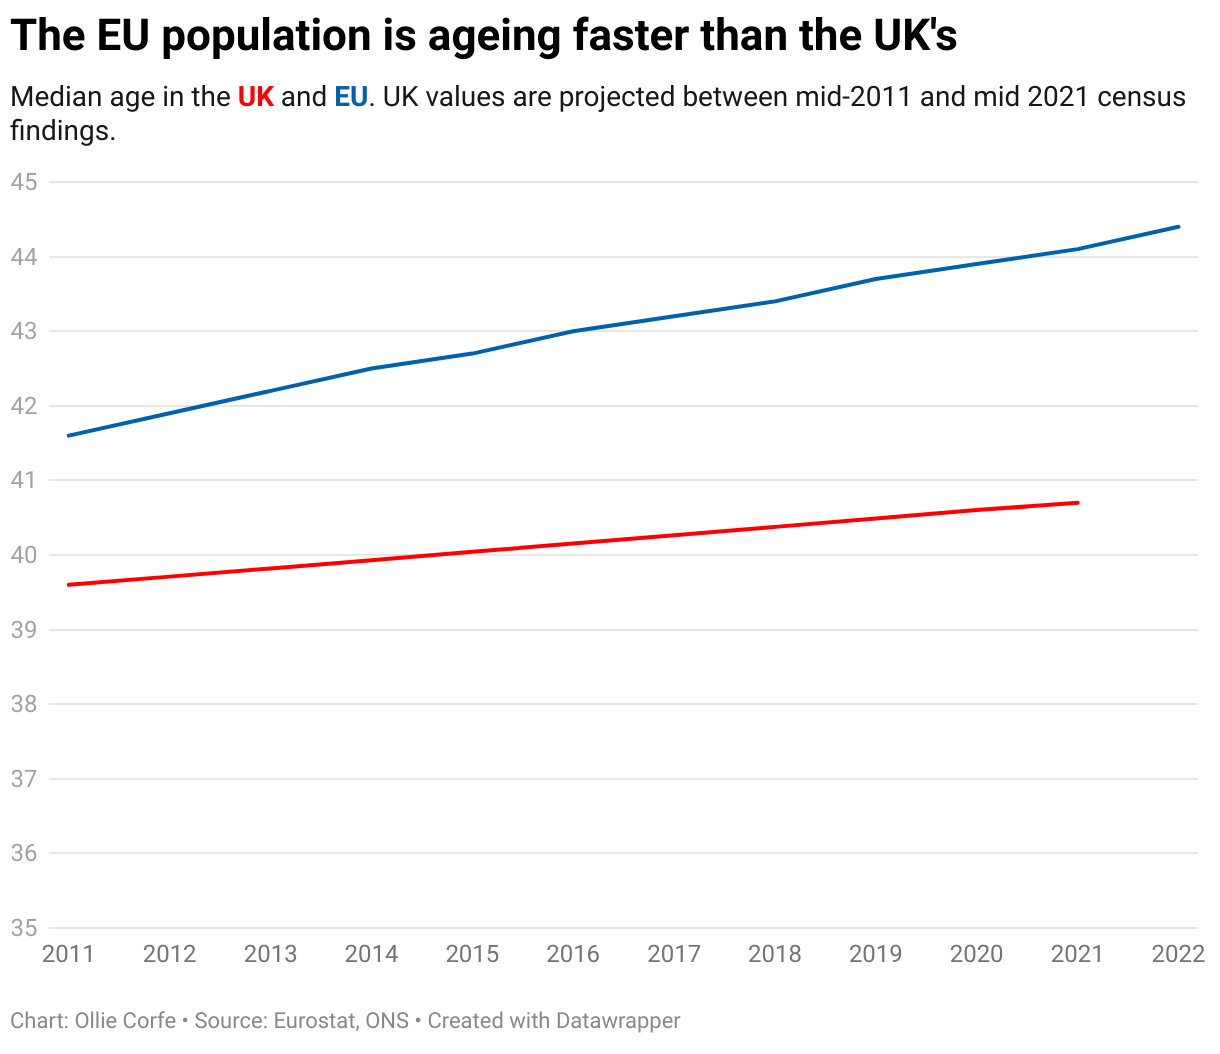 Line chart displaying the median age of the UK and Eu populations.